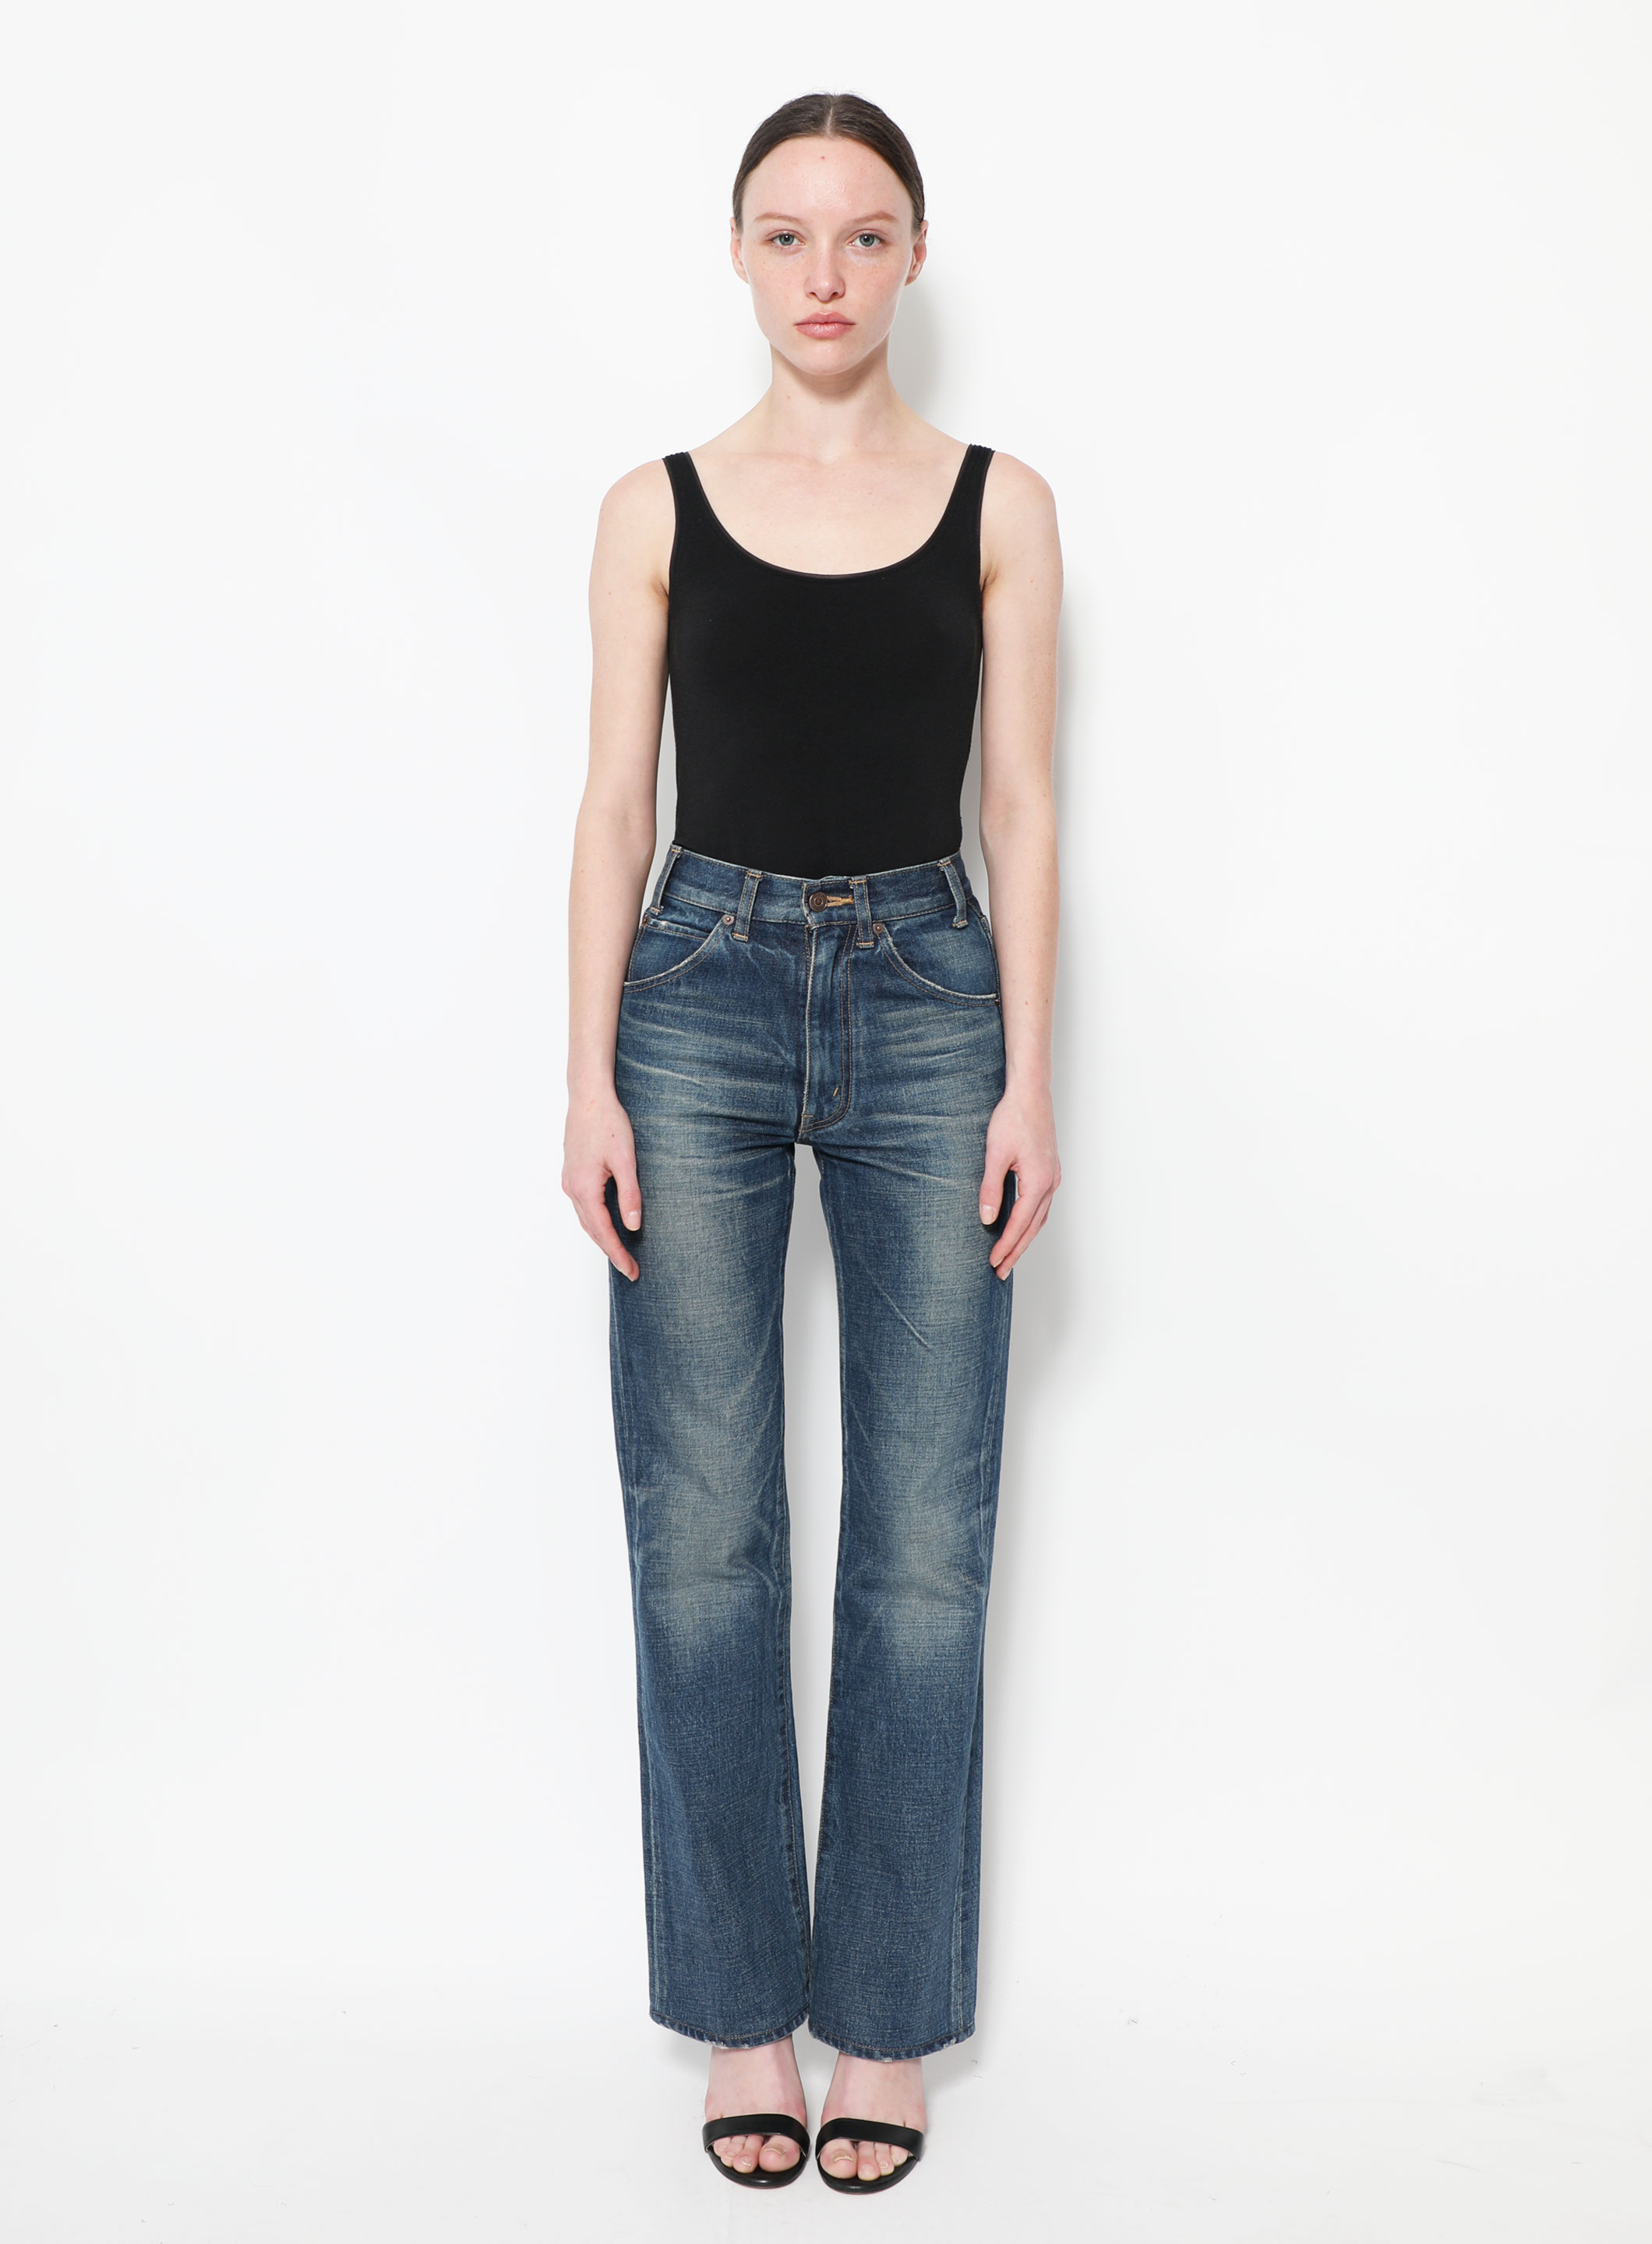 Stonewashed Monogram Patch Boot-Cut Jeans - Women - Ready-to-Wear